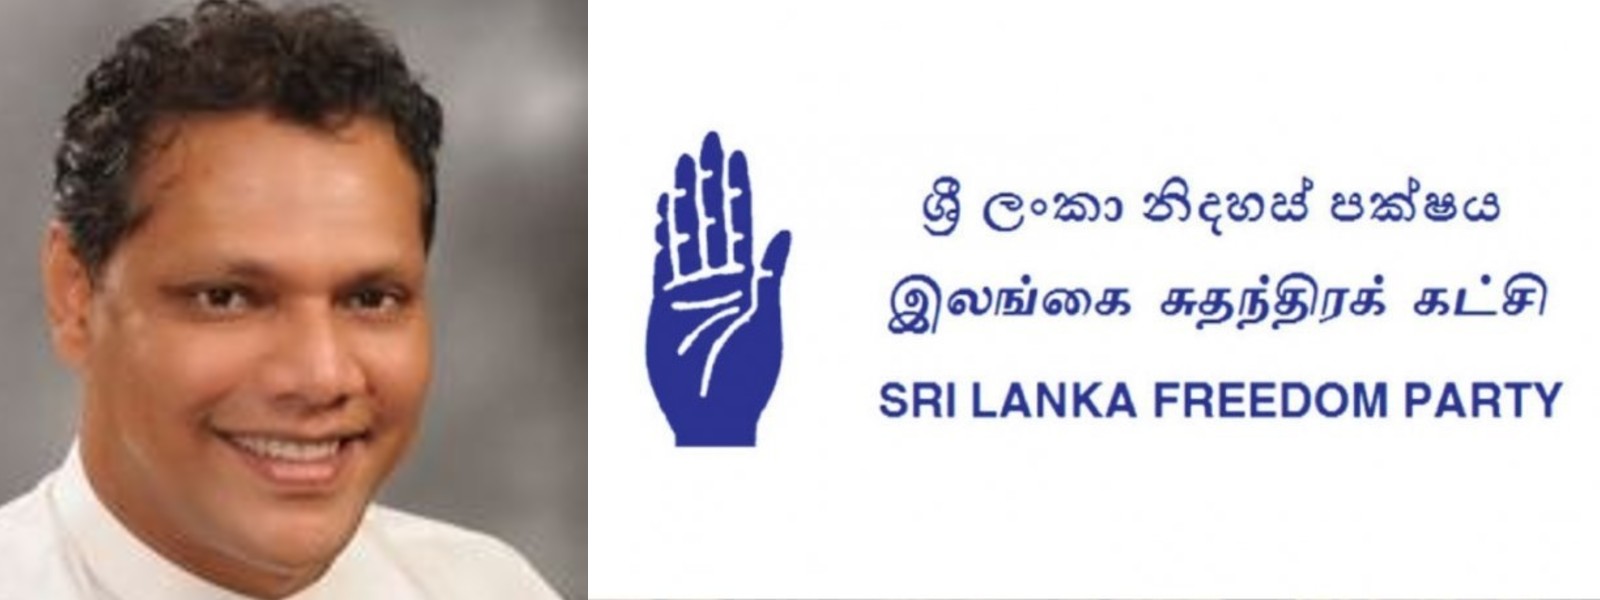 SLFP to contest separately under the symbol of the hand